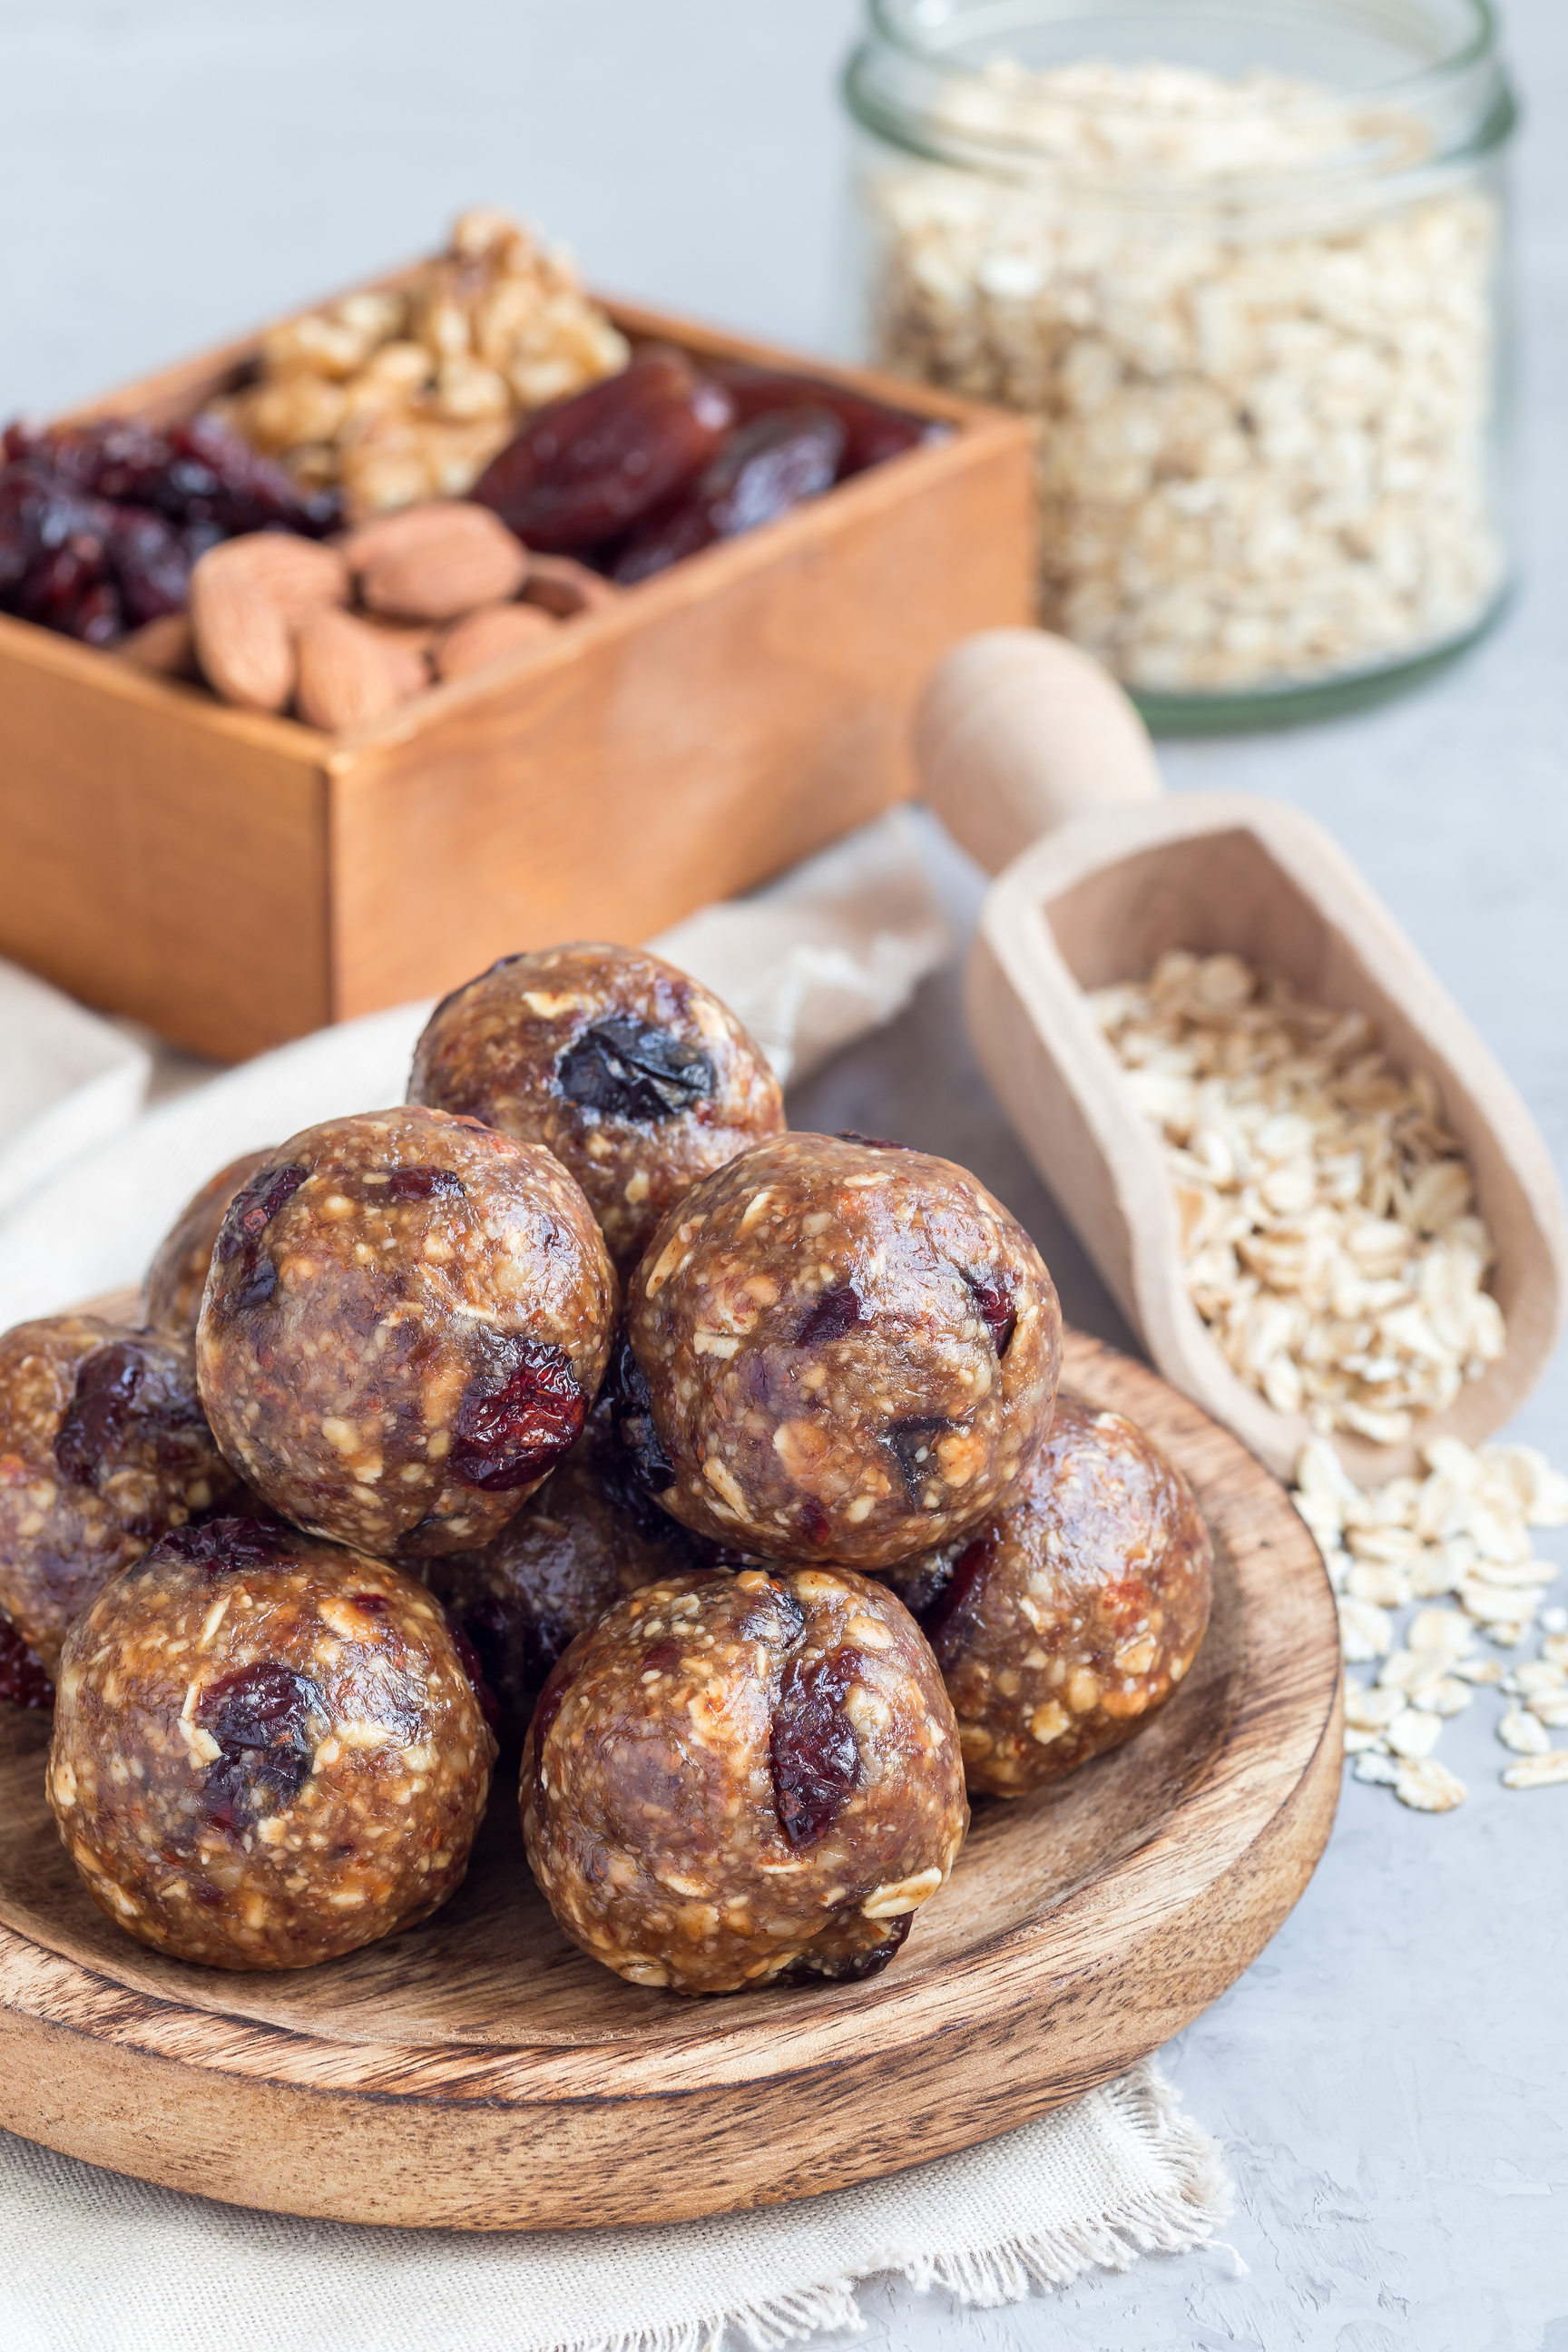 Healthy energy balls with cranberries, nuts, dates and rolled oats on wooden plate, vertical